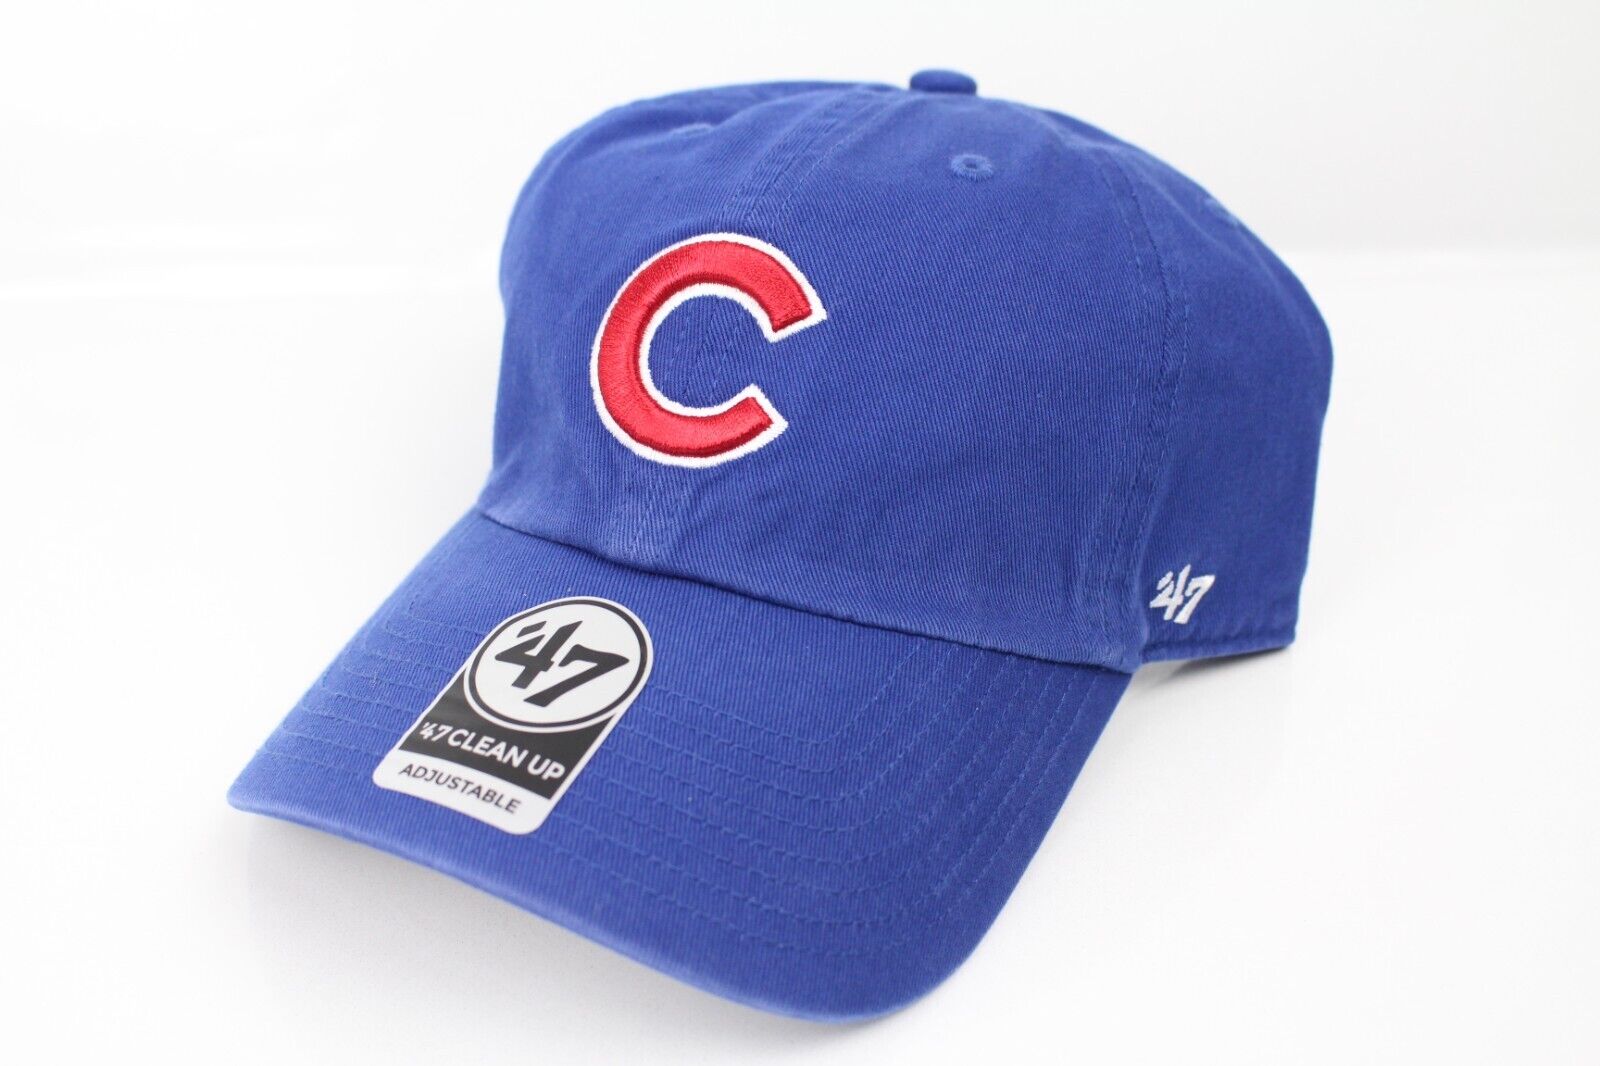 Chicago Cubs Hat 47 Clean Up  Adjustable Adult One Size Royal Blue Red